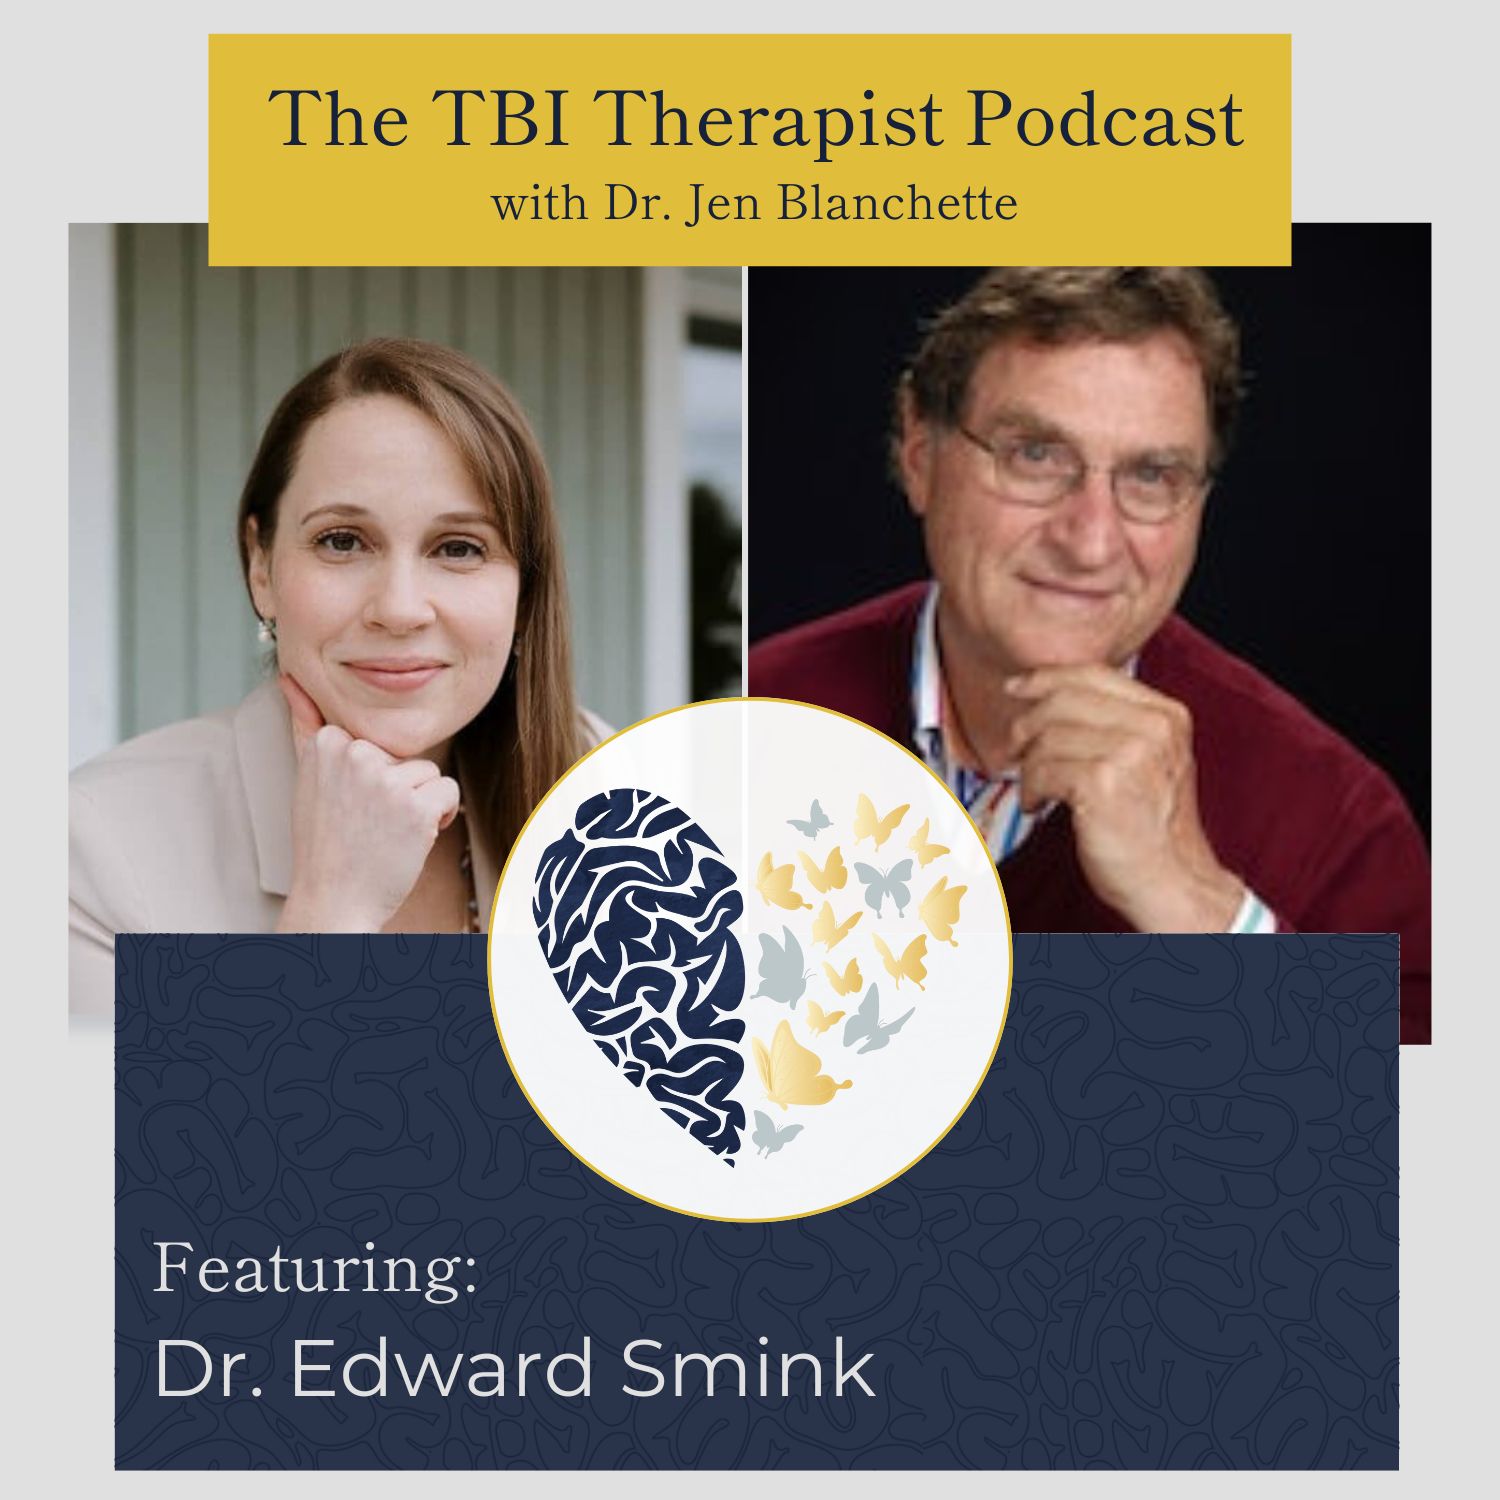 The TBI Therapist Podcast with Dr. Jen Blanchette and Edward Smink